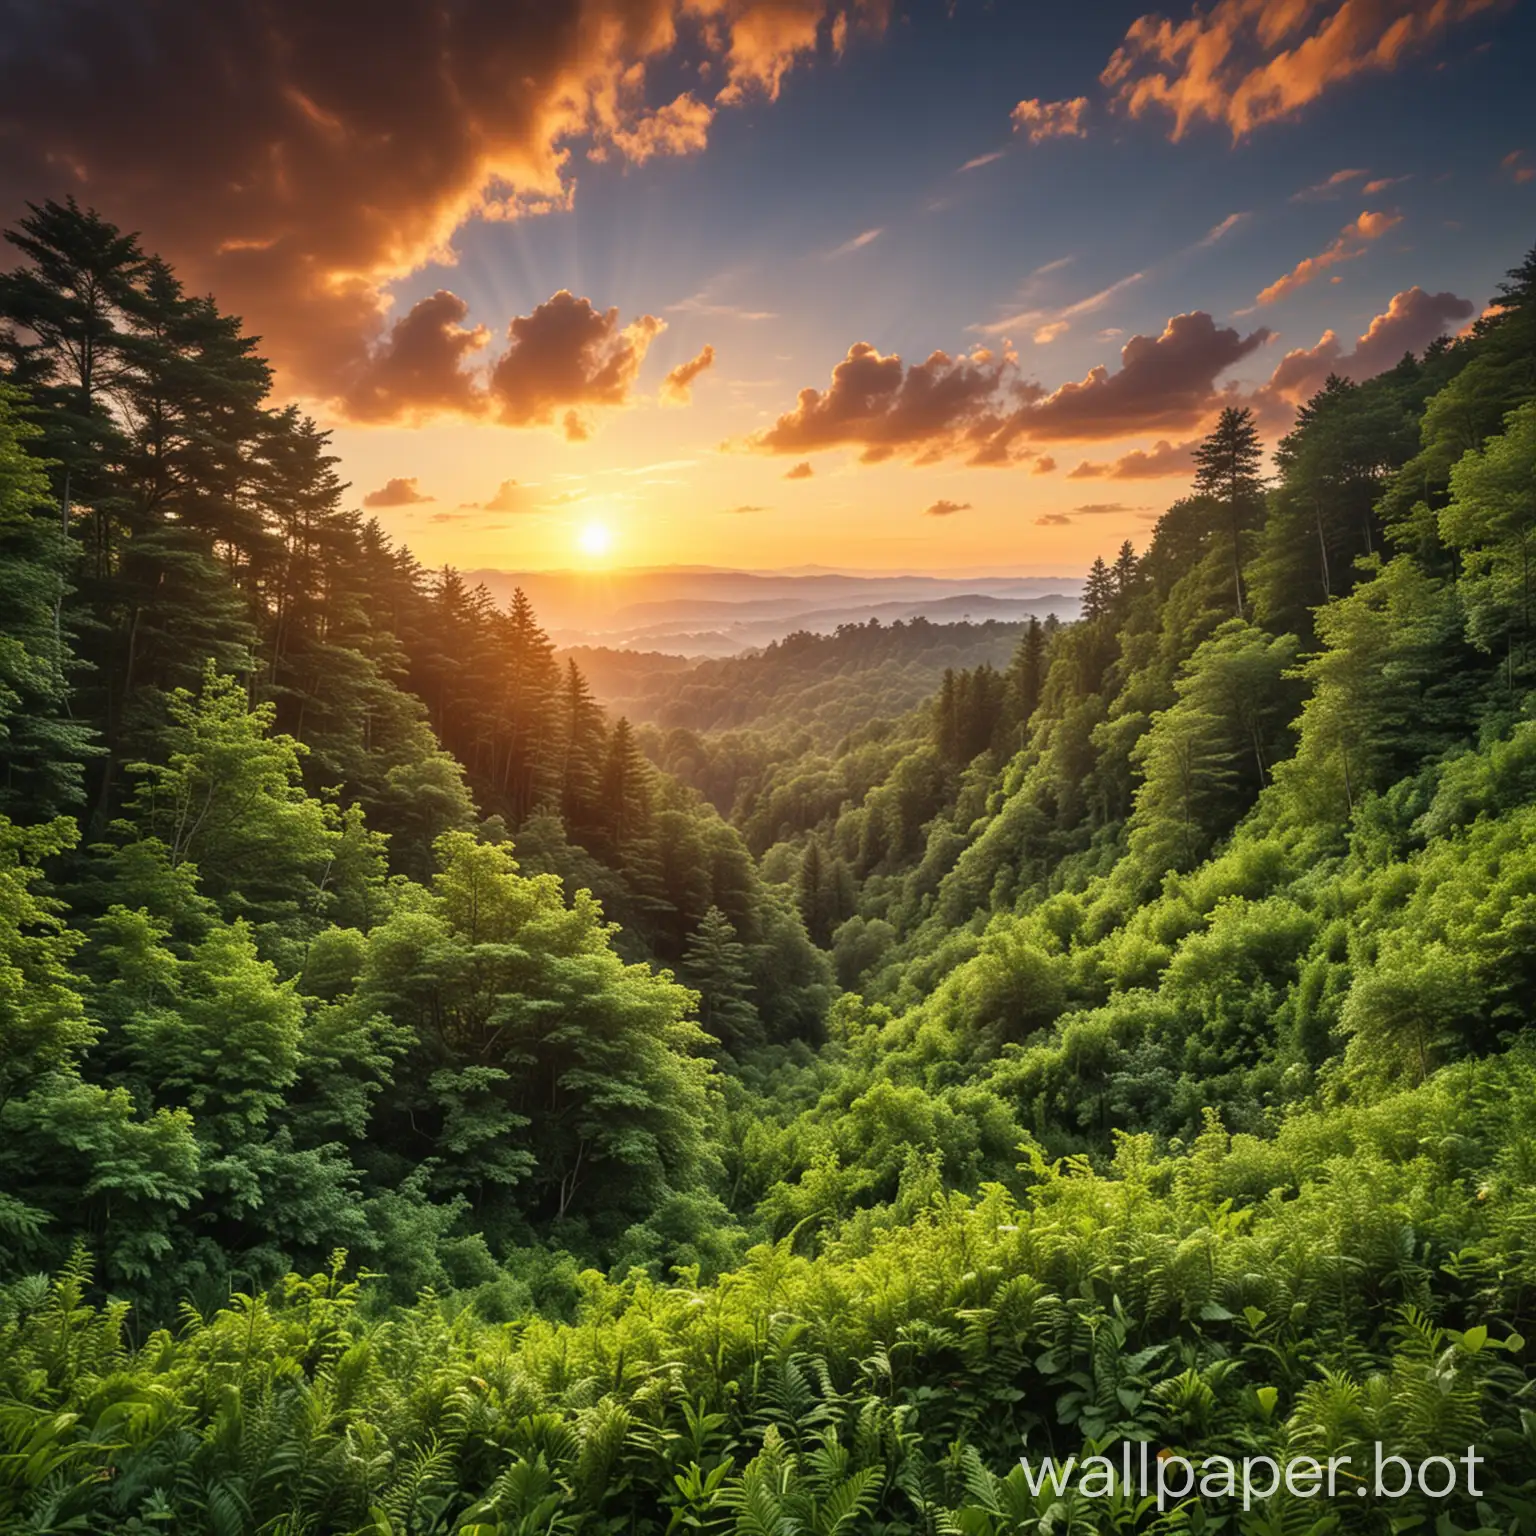 Lush green forest with a sunrise in the sky